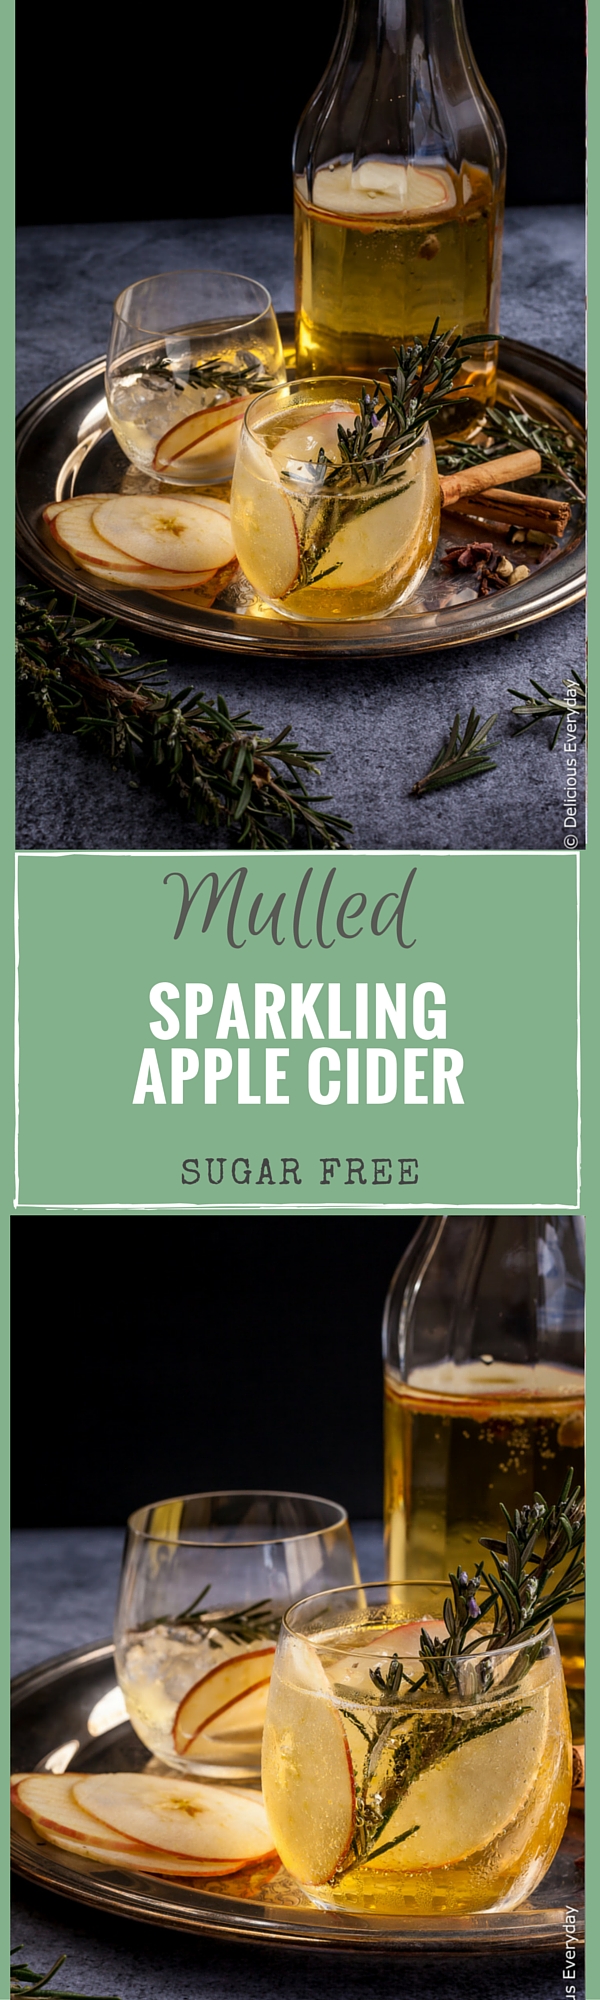 Beat the winter blues with this gorgeous fragrant homemade sugar-free Mulled Apple Cider recipe which tastes just like apple pie!